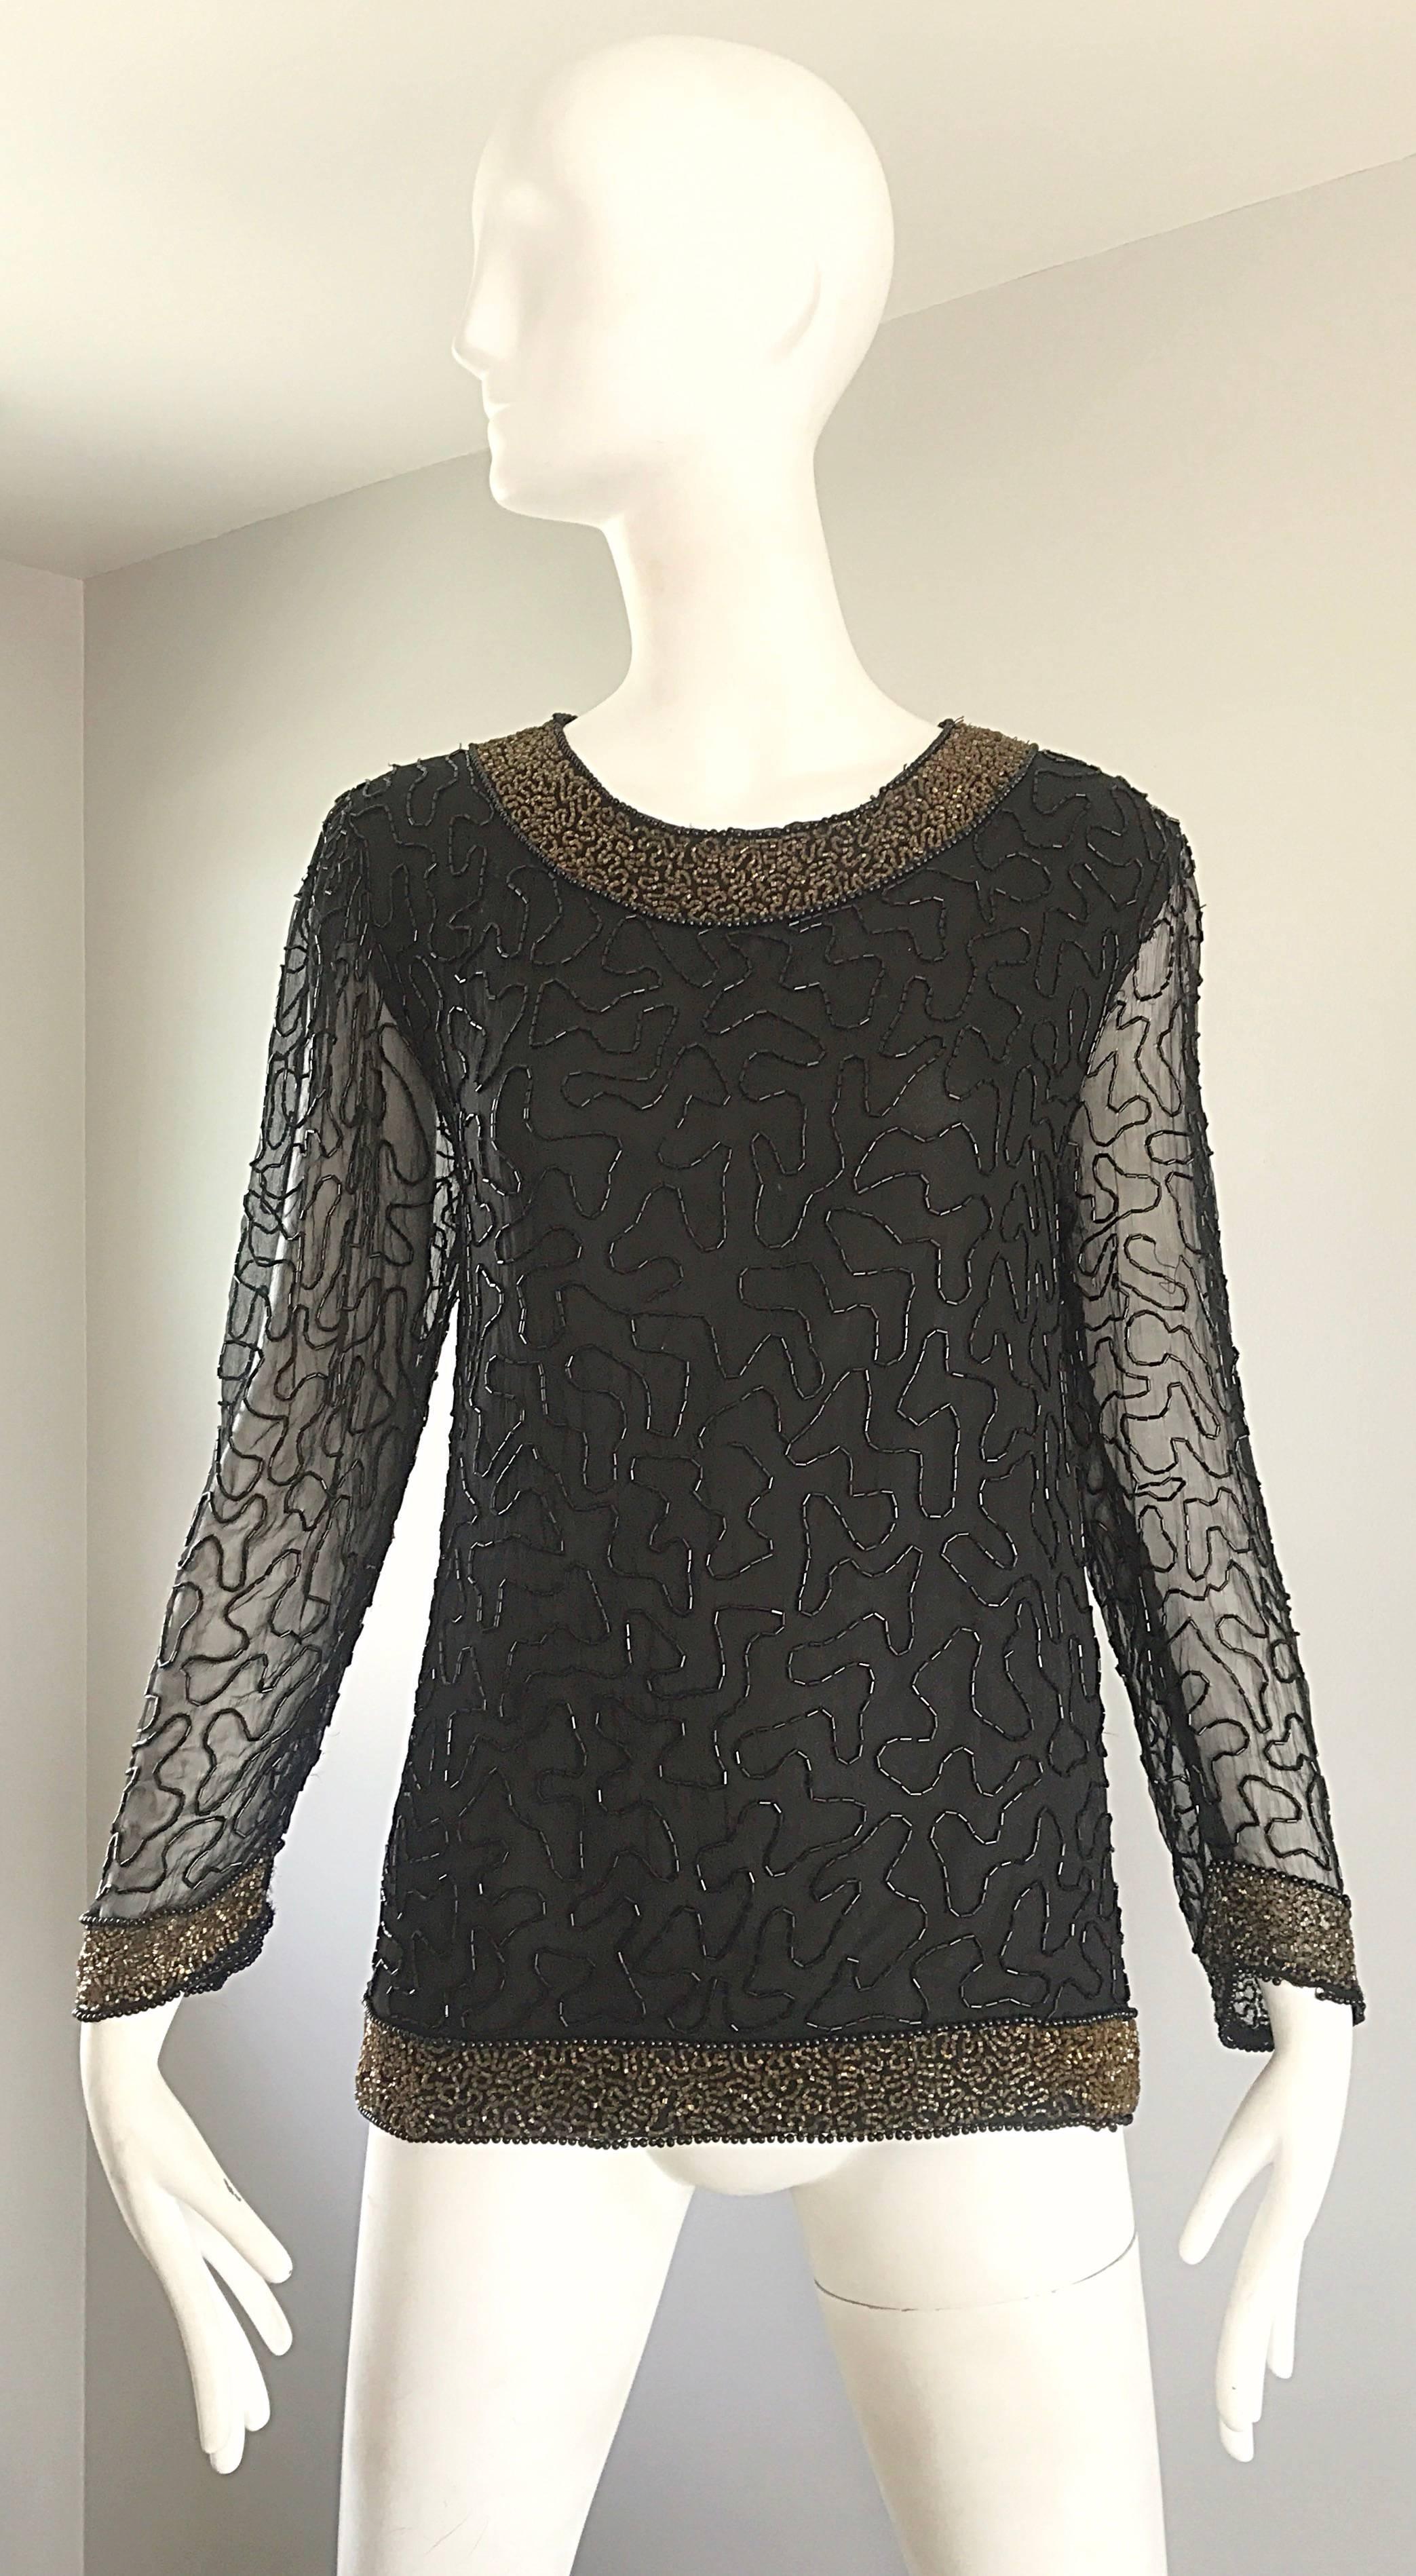 Stunning 1980s SWEE LO black and gold hand beaded silk chiffon long sleeve blouse! Wonderful tailored fit, with thousands of hand-sewn seed beads throughout. Neckline, sleeve cuffs, and waistband are all encrusted with goldseed beads. Semi sheer